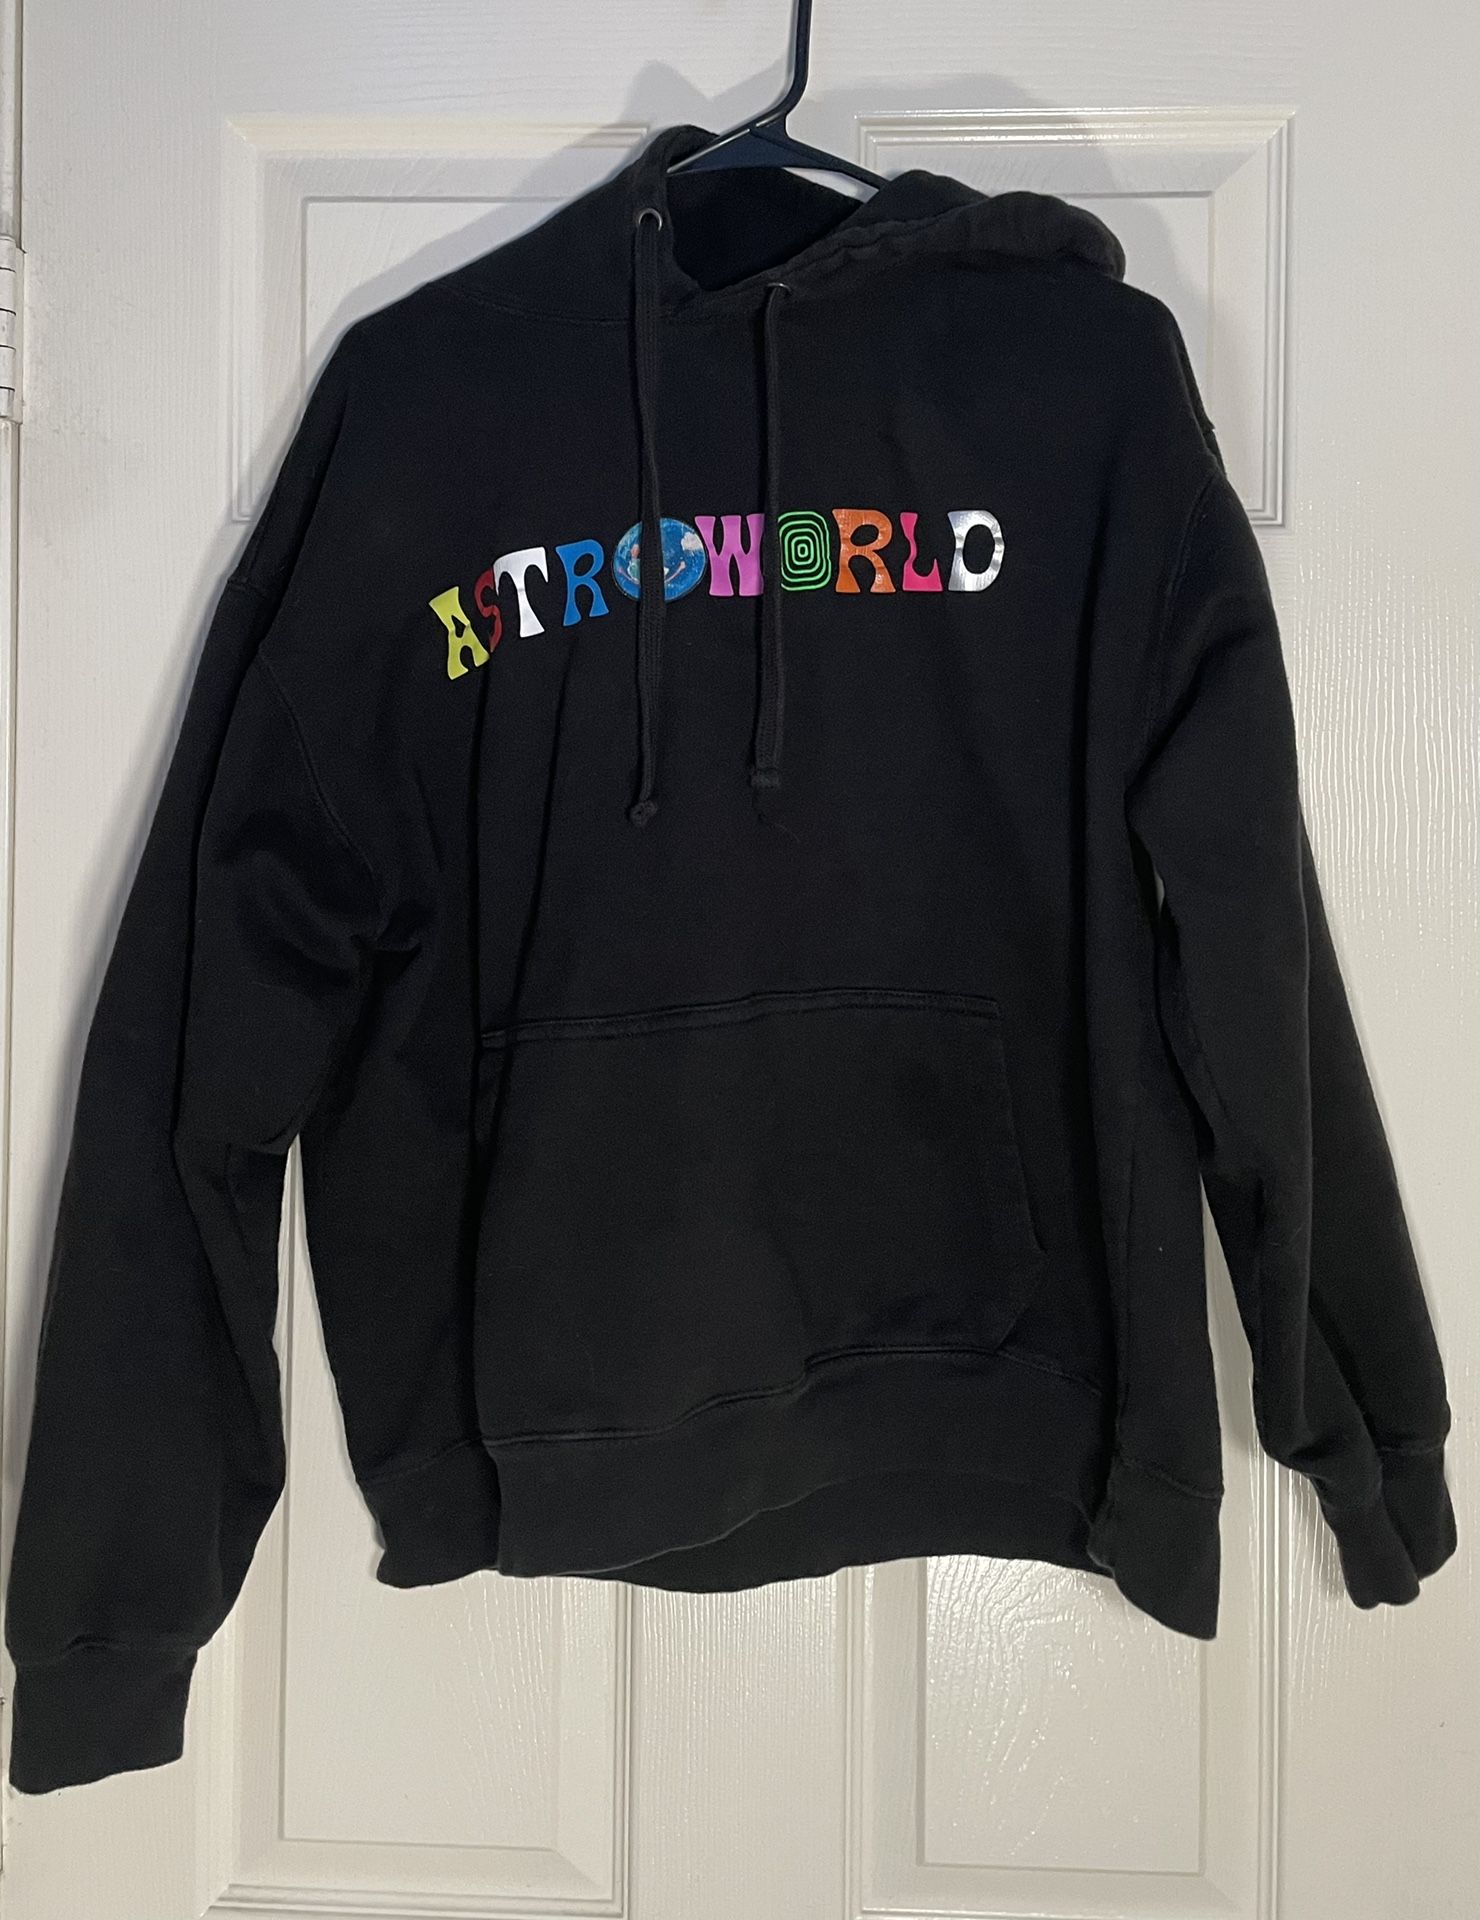 Astroworld Travis Scott Embroidered Wish You Were Here Black Hoodie Size Large